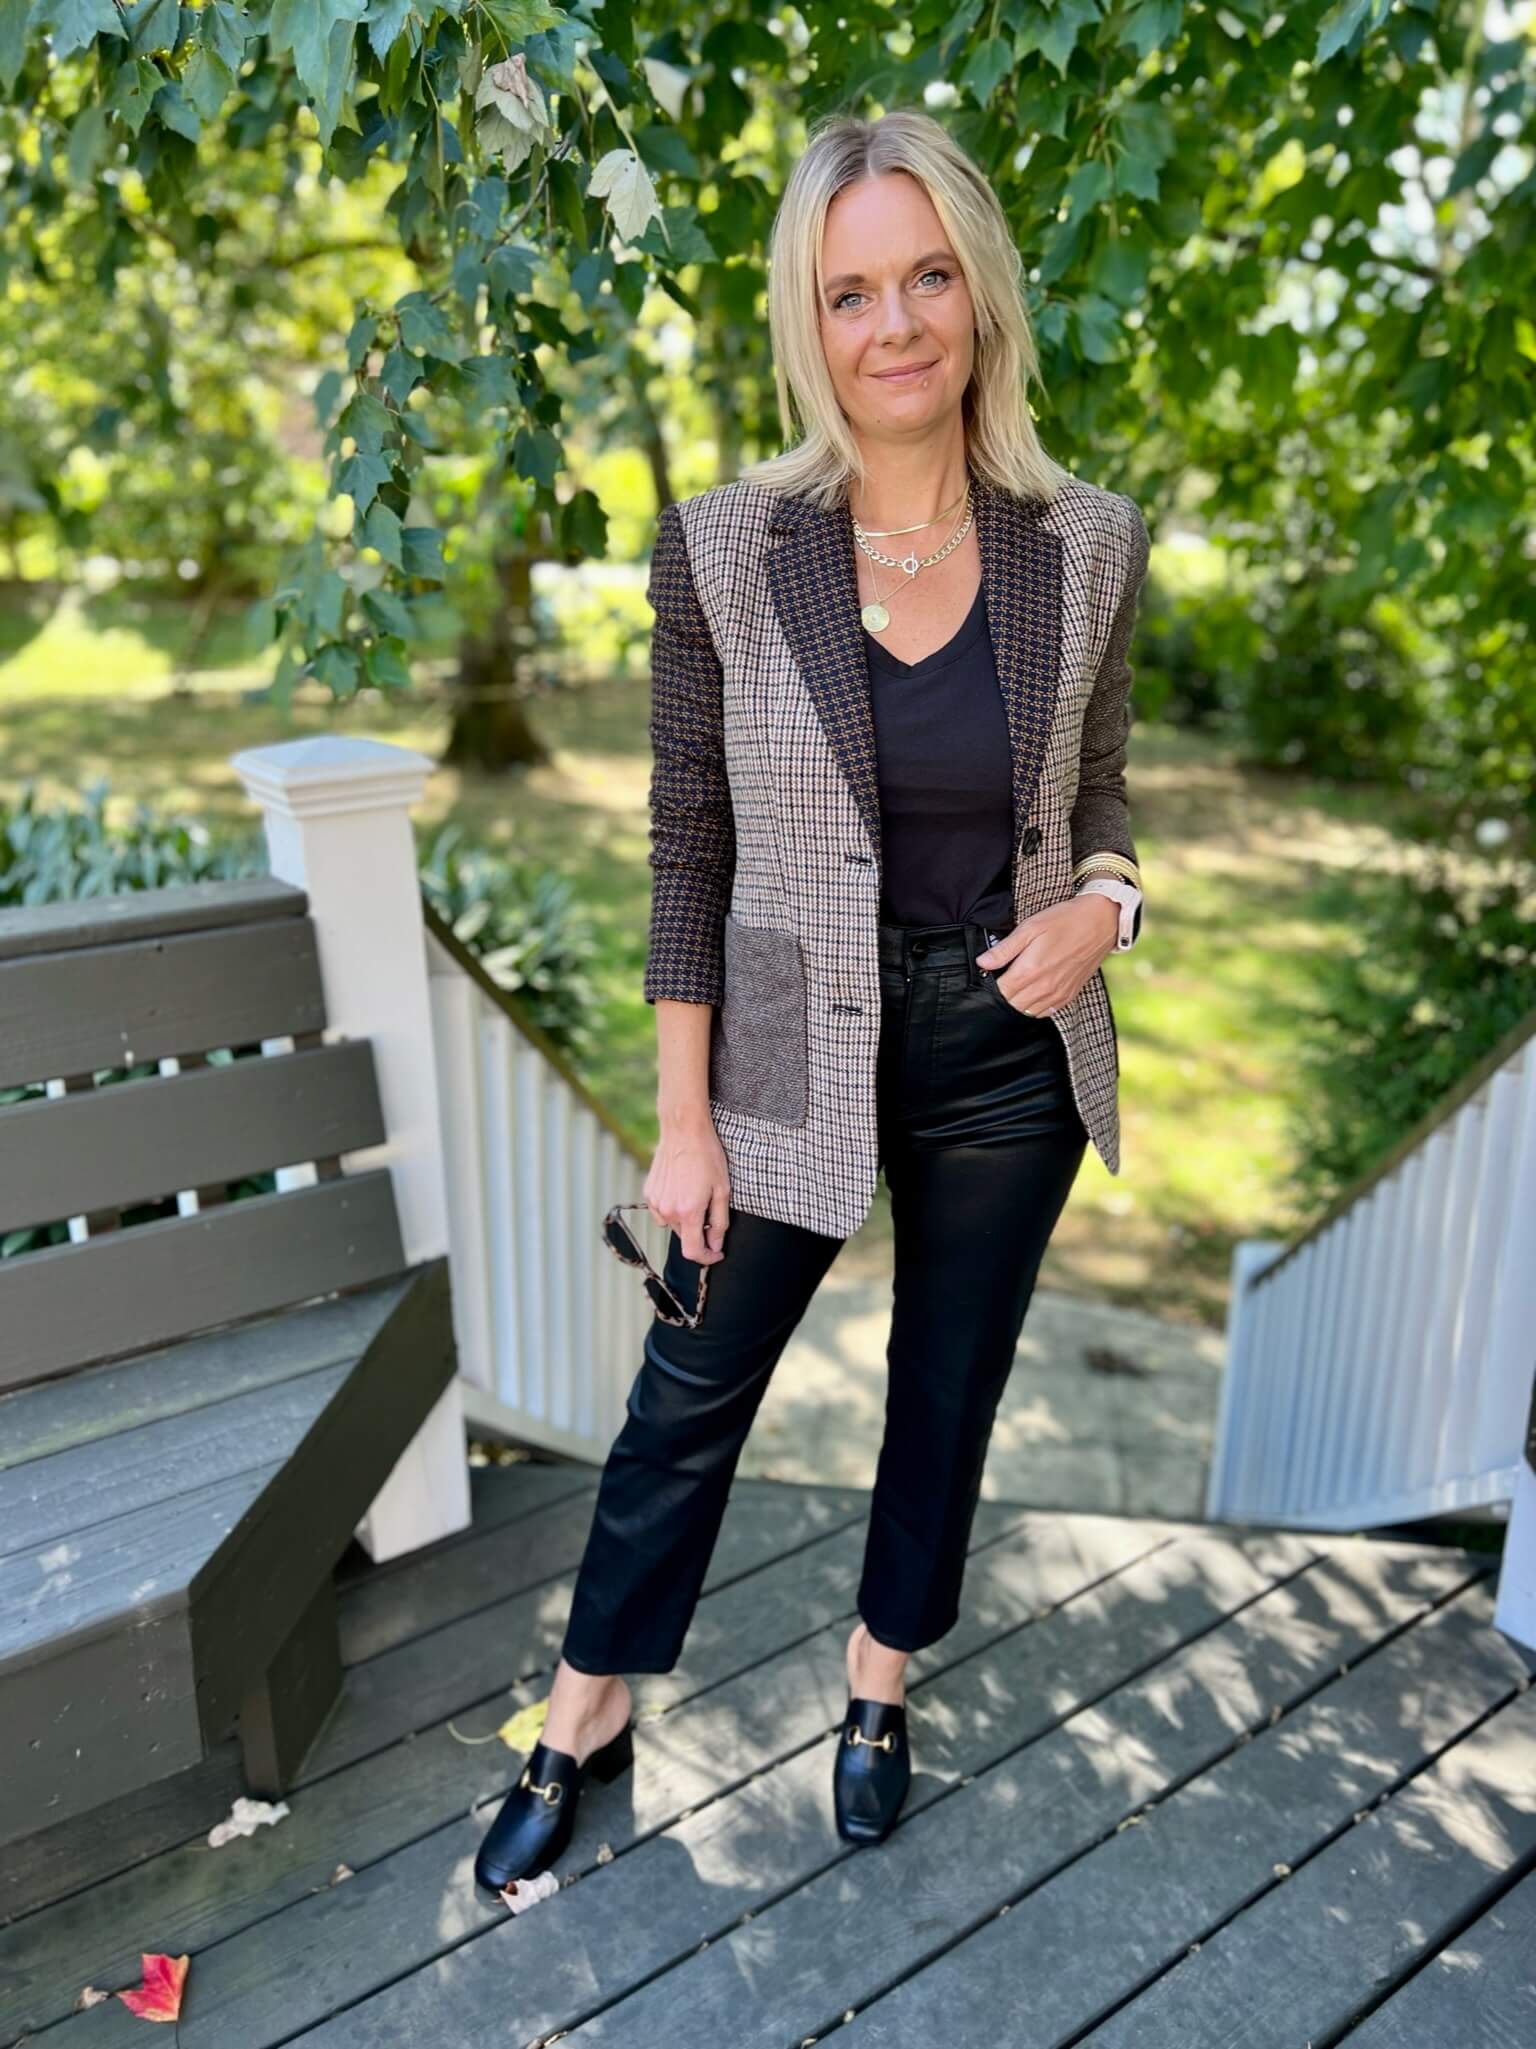 3 Pairs Of Jeans You Need This Season plaid blazer and coated jeans how to style coated jeans for work how to wear coated jeans for work how to style loafer mules nashville stylists share favorite coated jeans